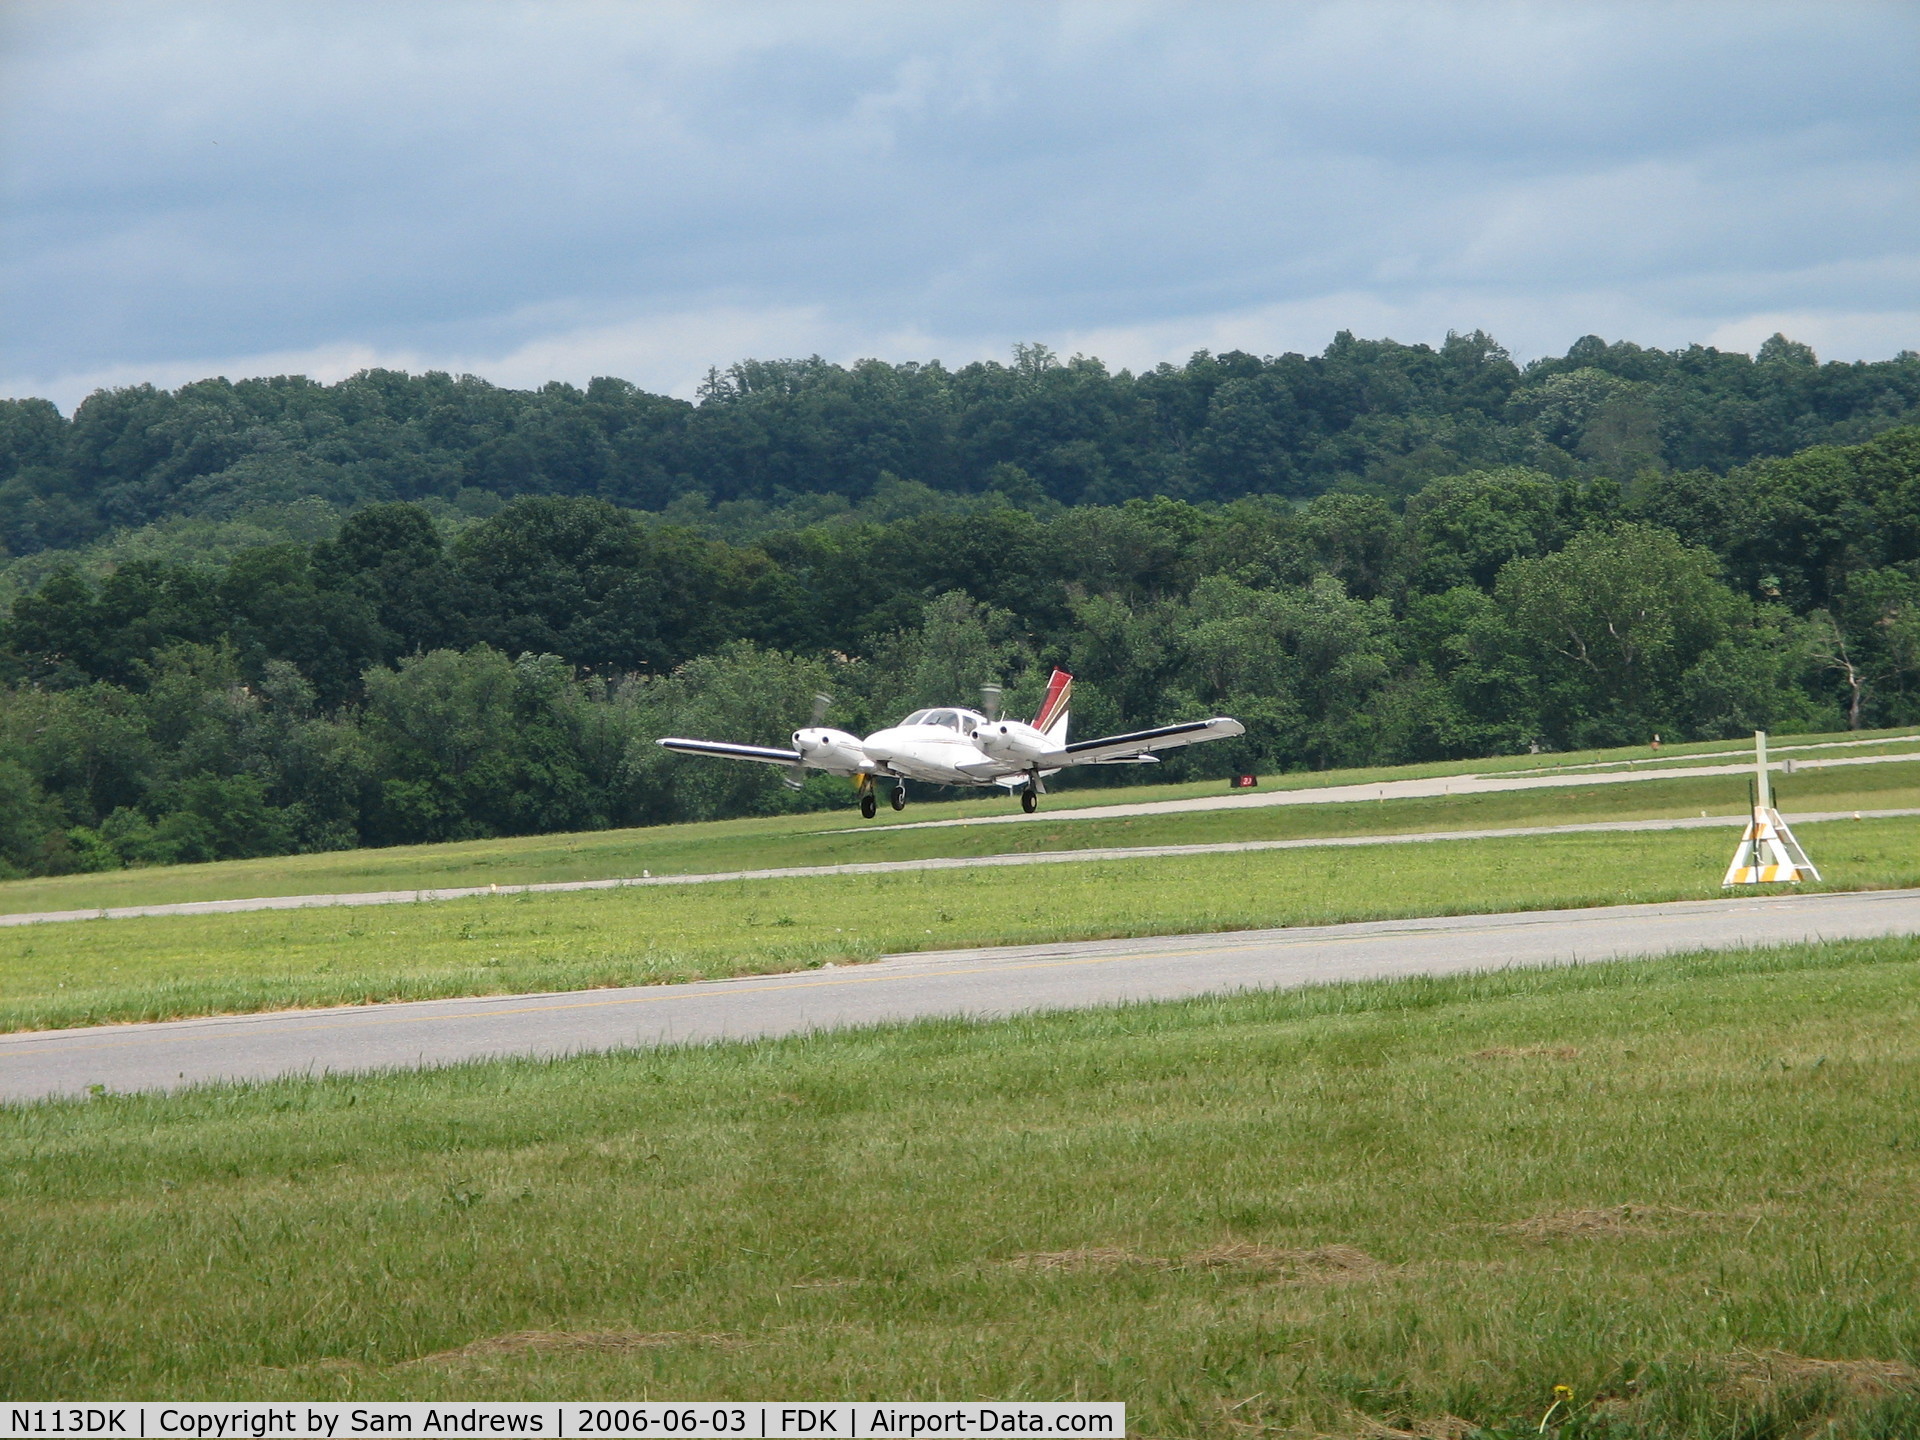 N113DK, 1978 Piper PA-34-200T C/N 34-7870151, Departing the AOPA Fly-In 2006.  On their way to Richmond.